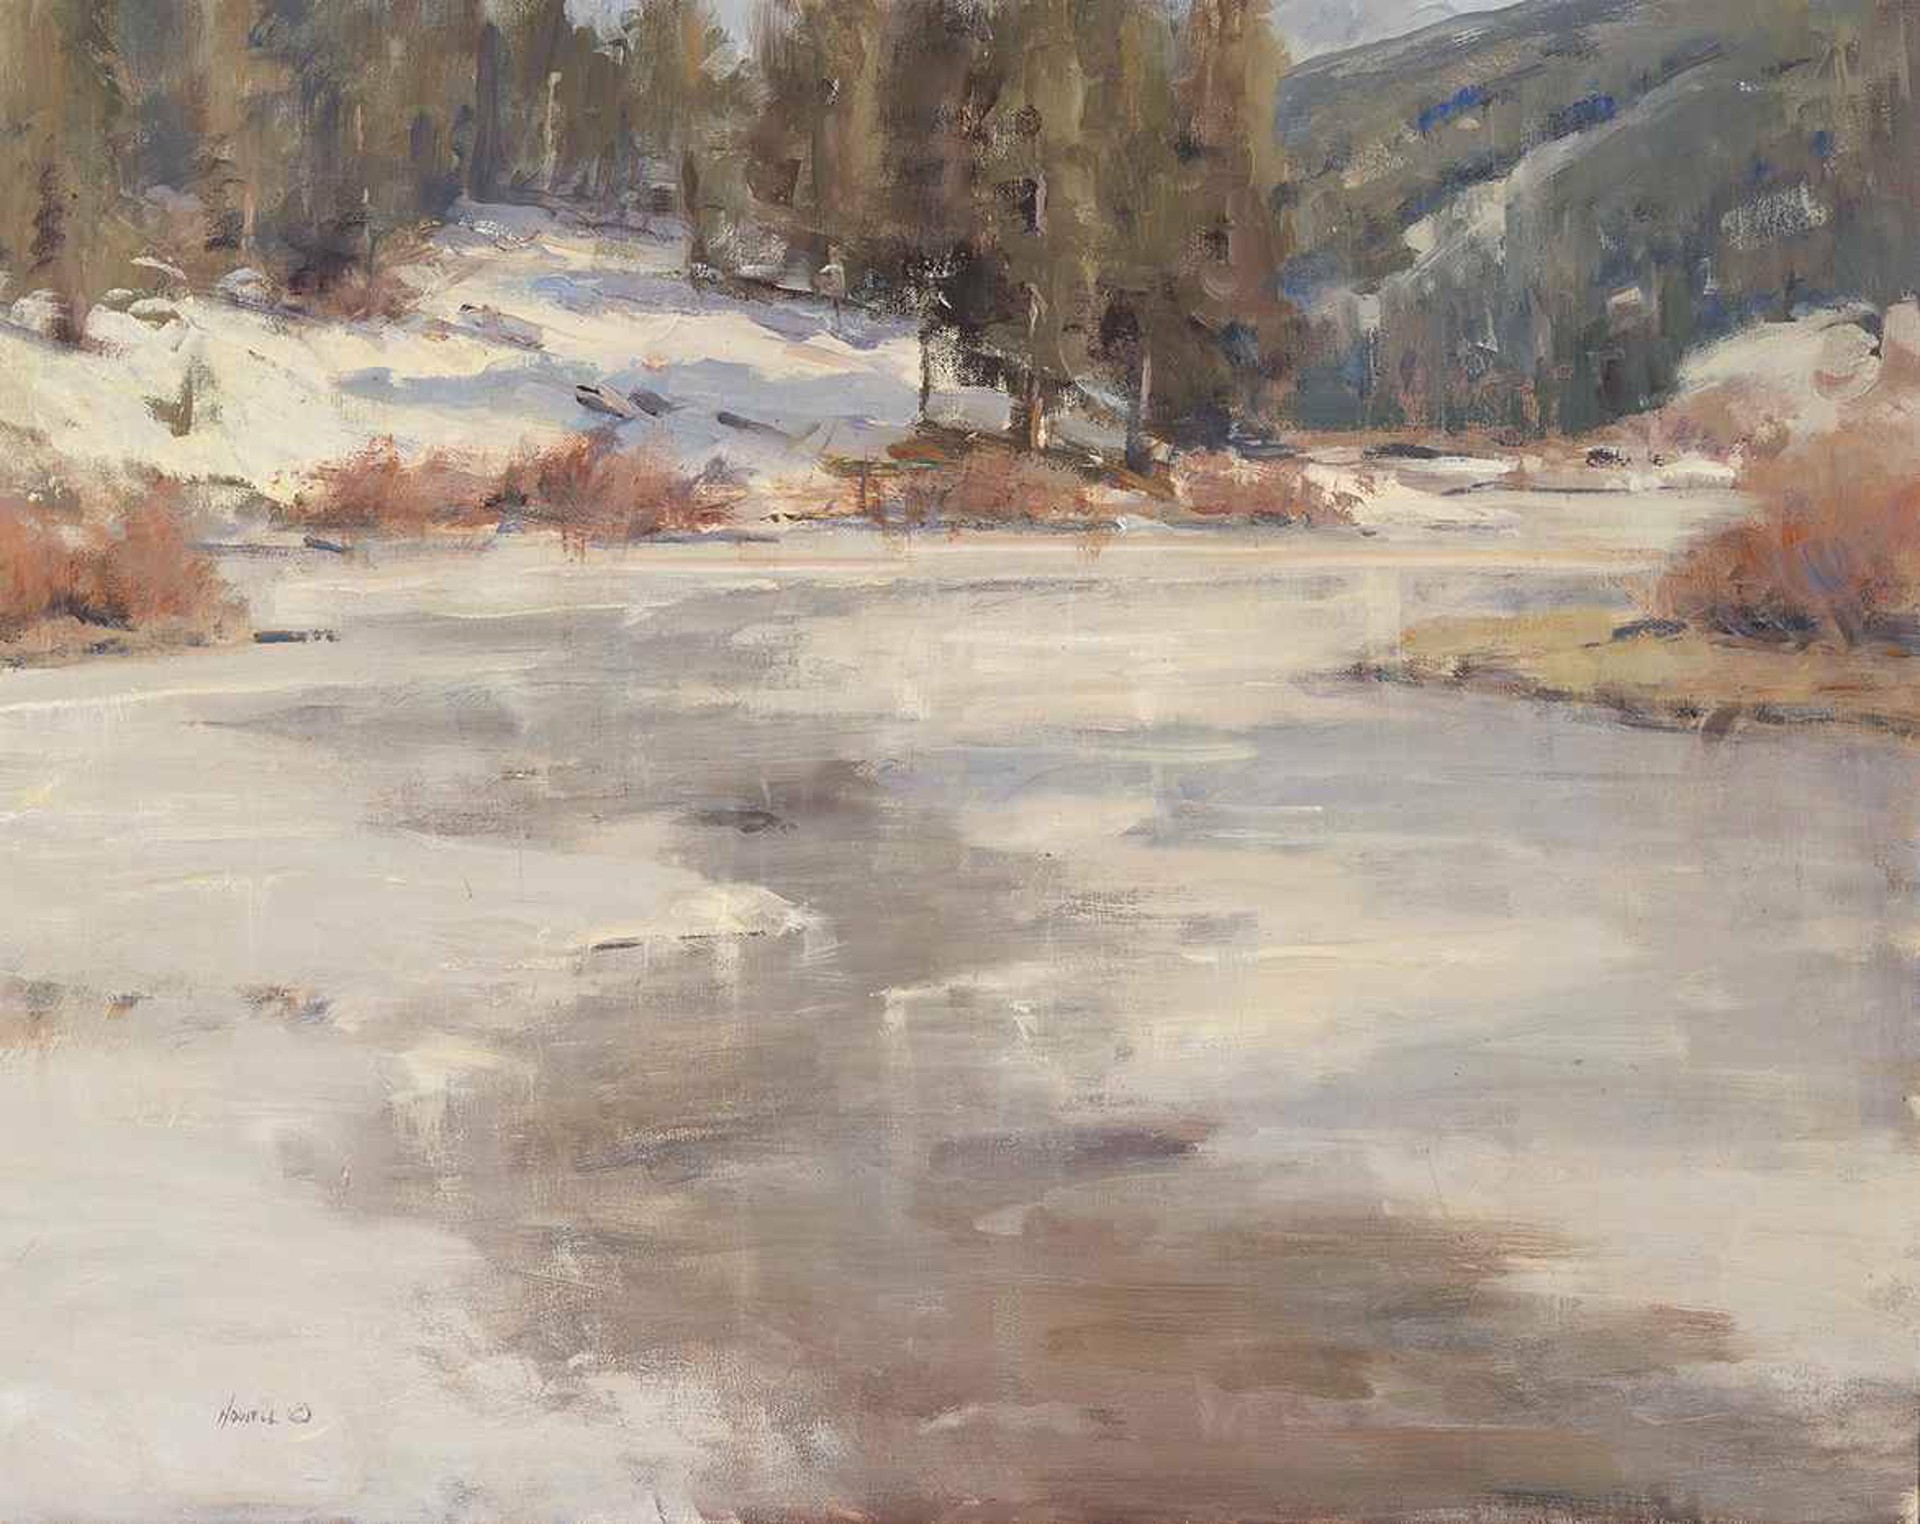 Conejos River Ice by Rick Howell